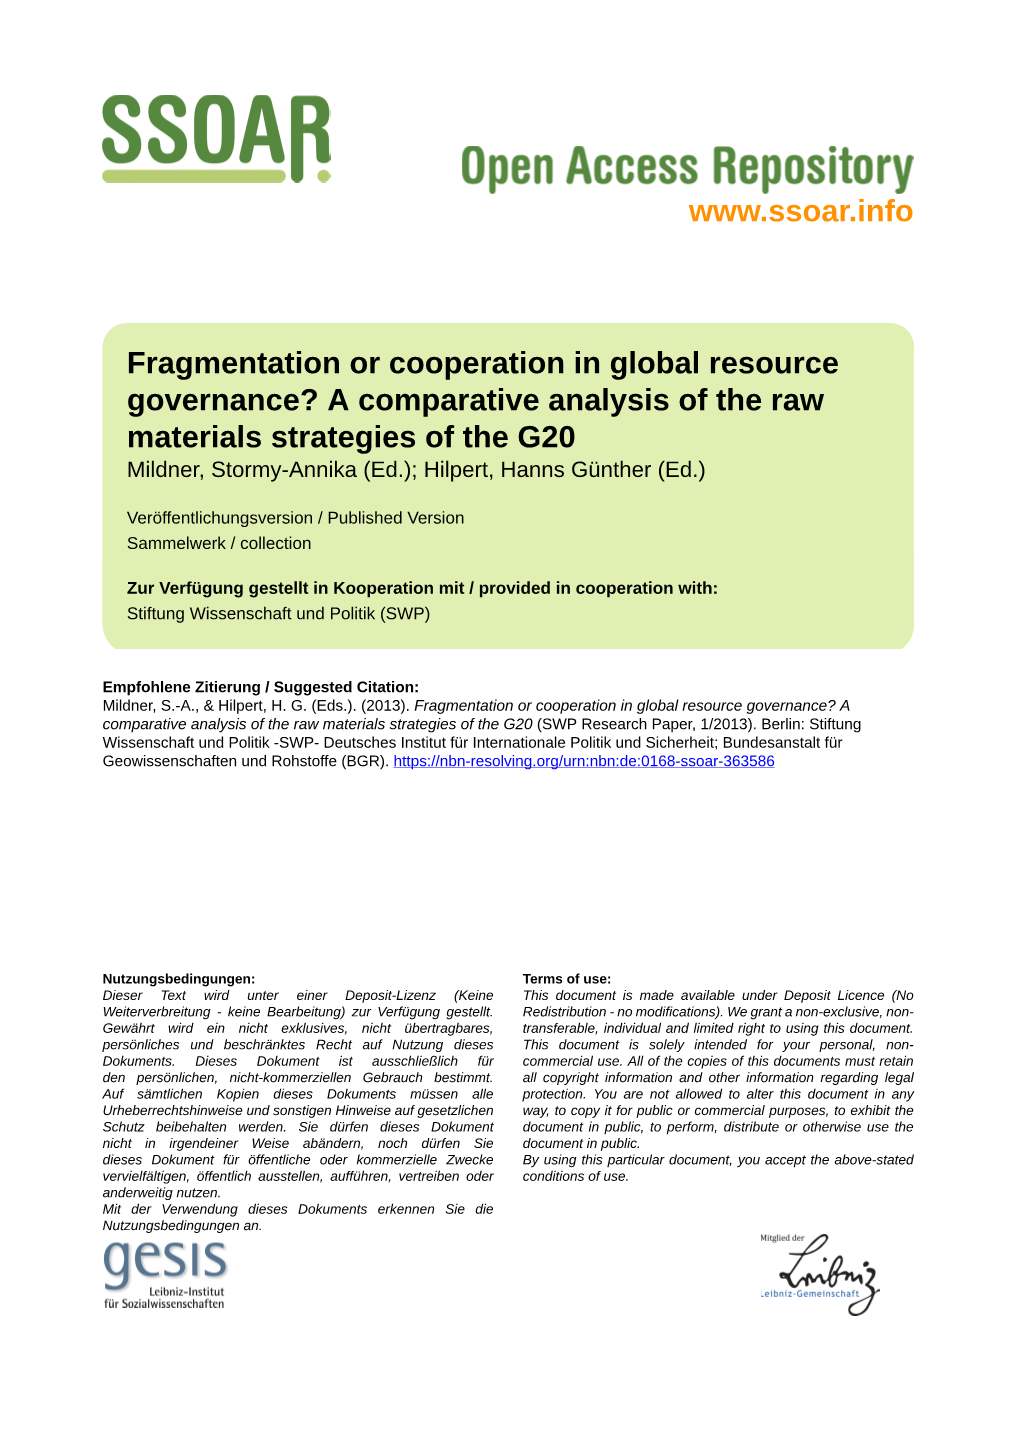 A Comparative Analysis of the Raw Materials Strategies of the G20 Mildner, Stormy-Annika (Ed.); Hilpert, Hanns Günther (Ed.)